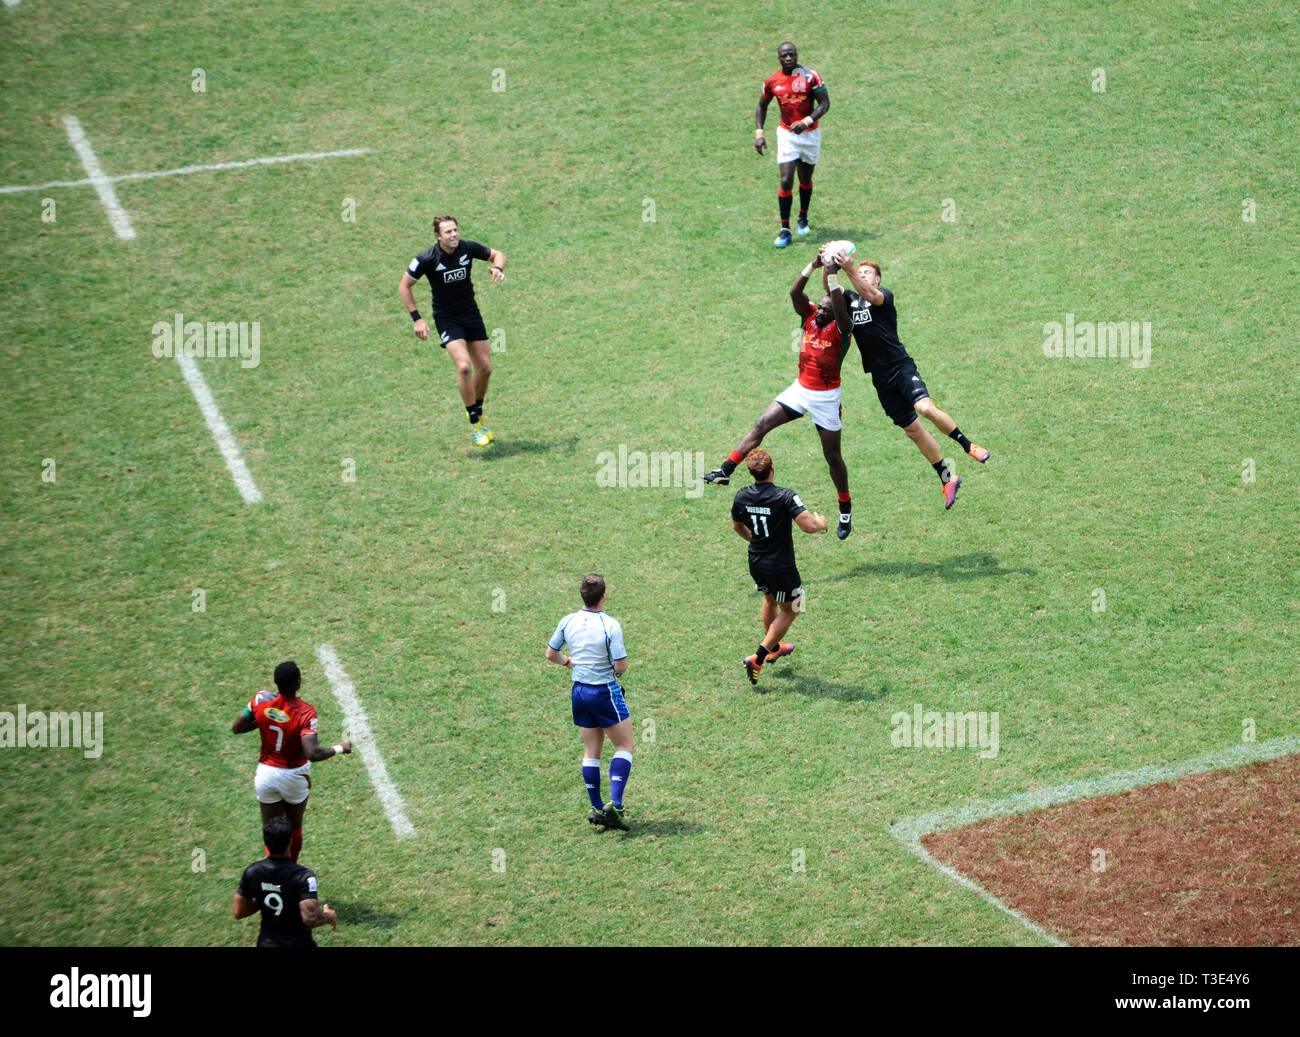 A Rugby Sevens match. Stock Photo